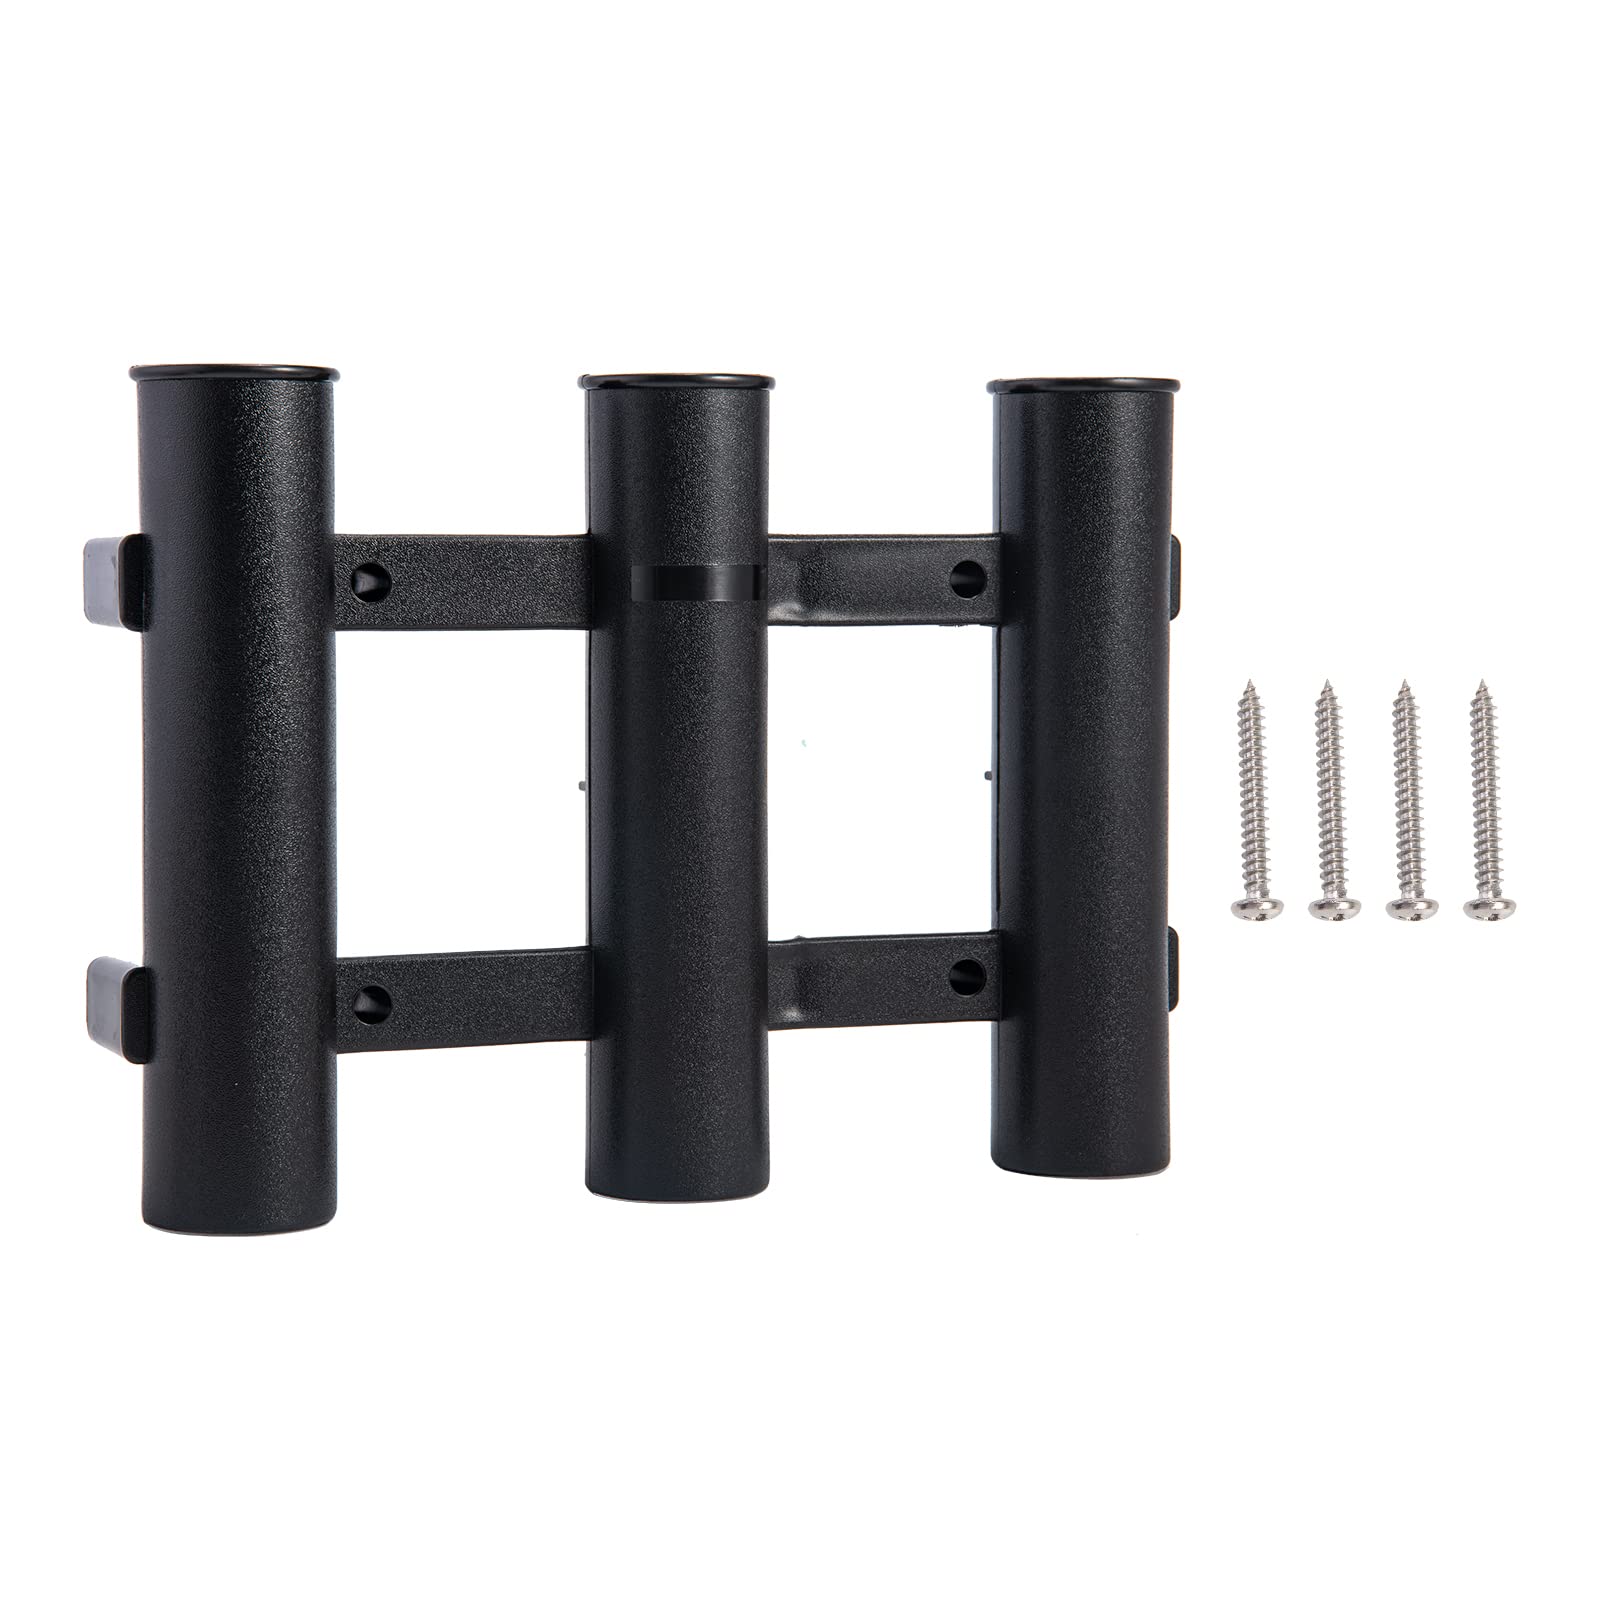 * Boat Fishing Rod Holder - Durable 3 Rod Tube Plastic Holder for  Convenient Fishing Tackle Storage